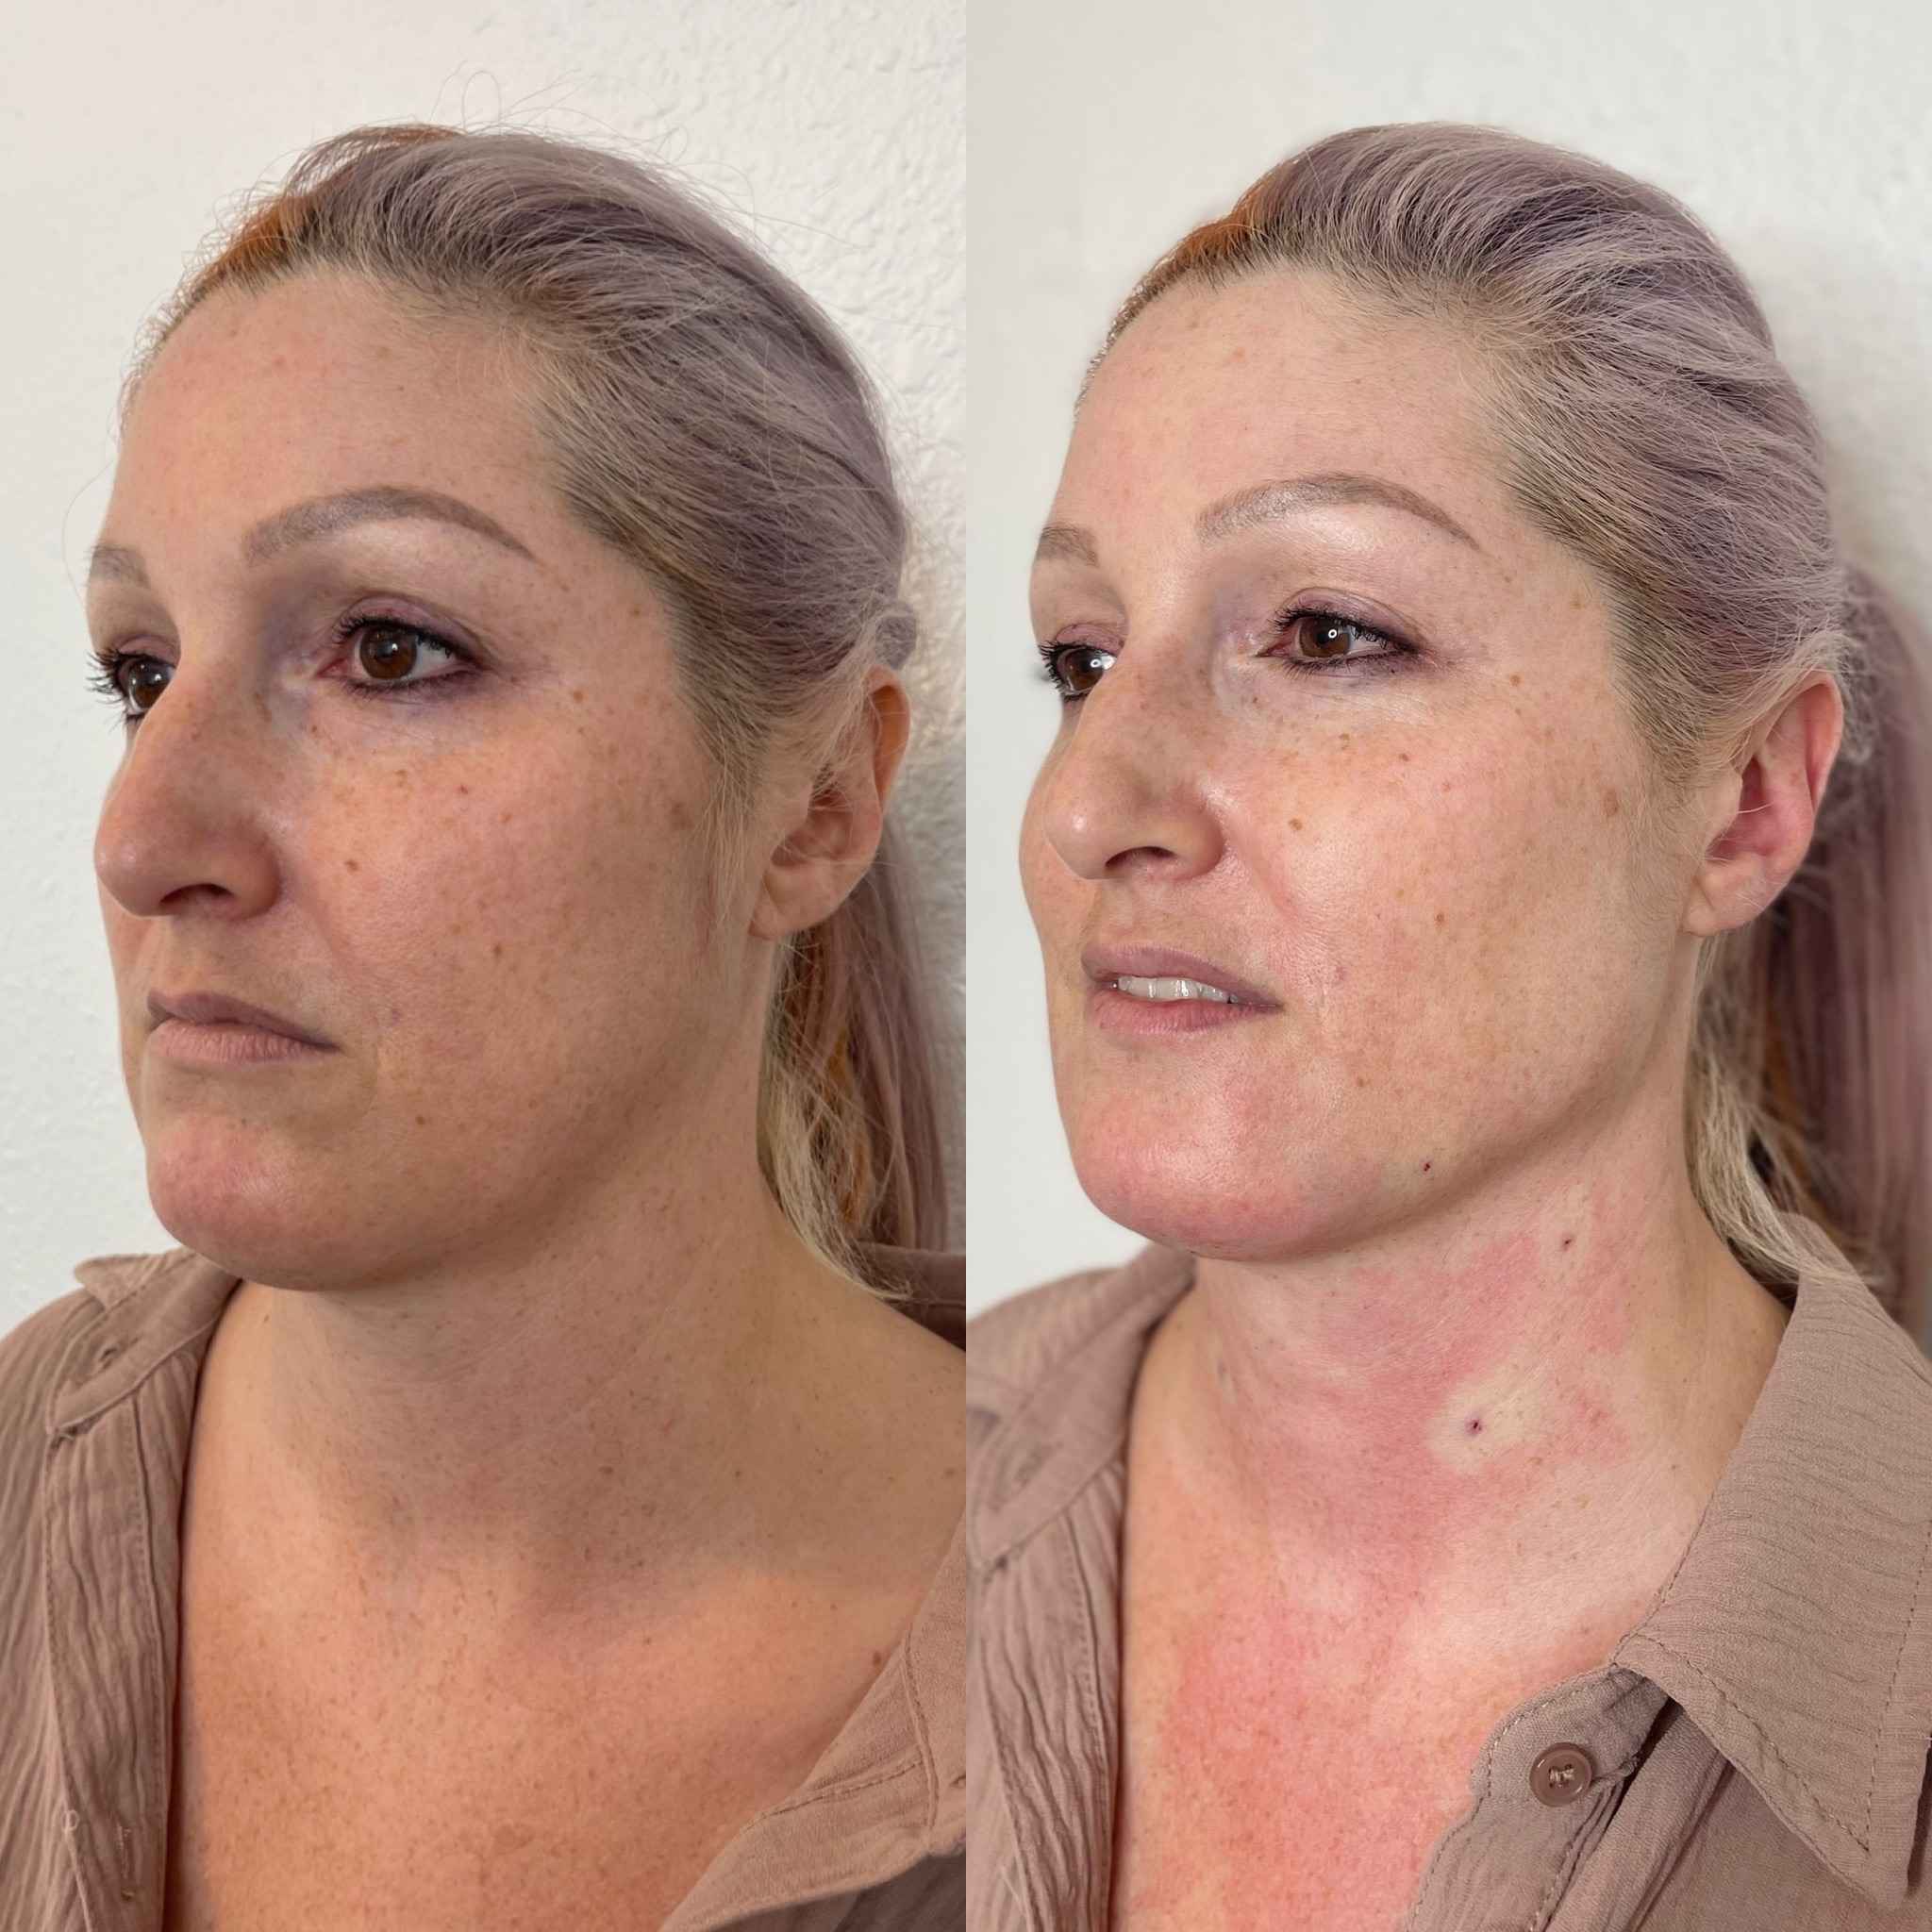 Before and After Bio Stimulator | Onyx Medical Aesthetics | Homann Dr. S.E. suite B Lacey, WA